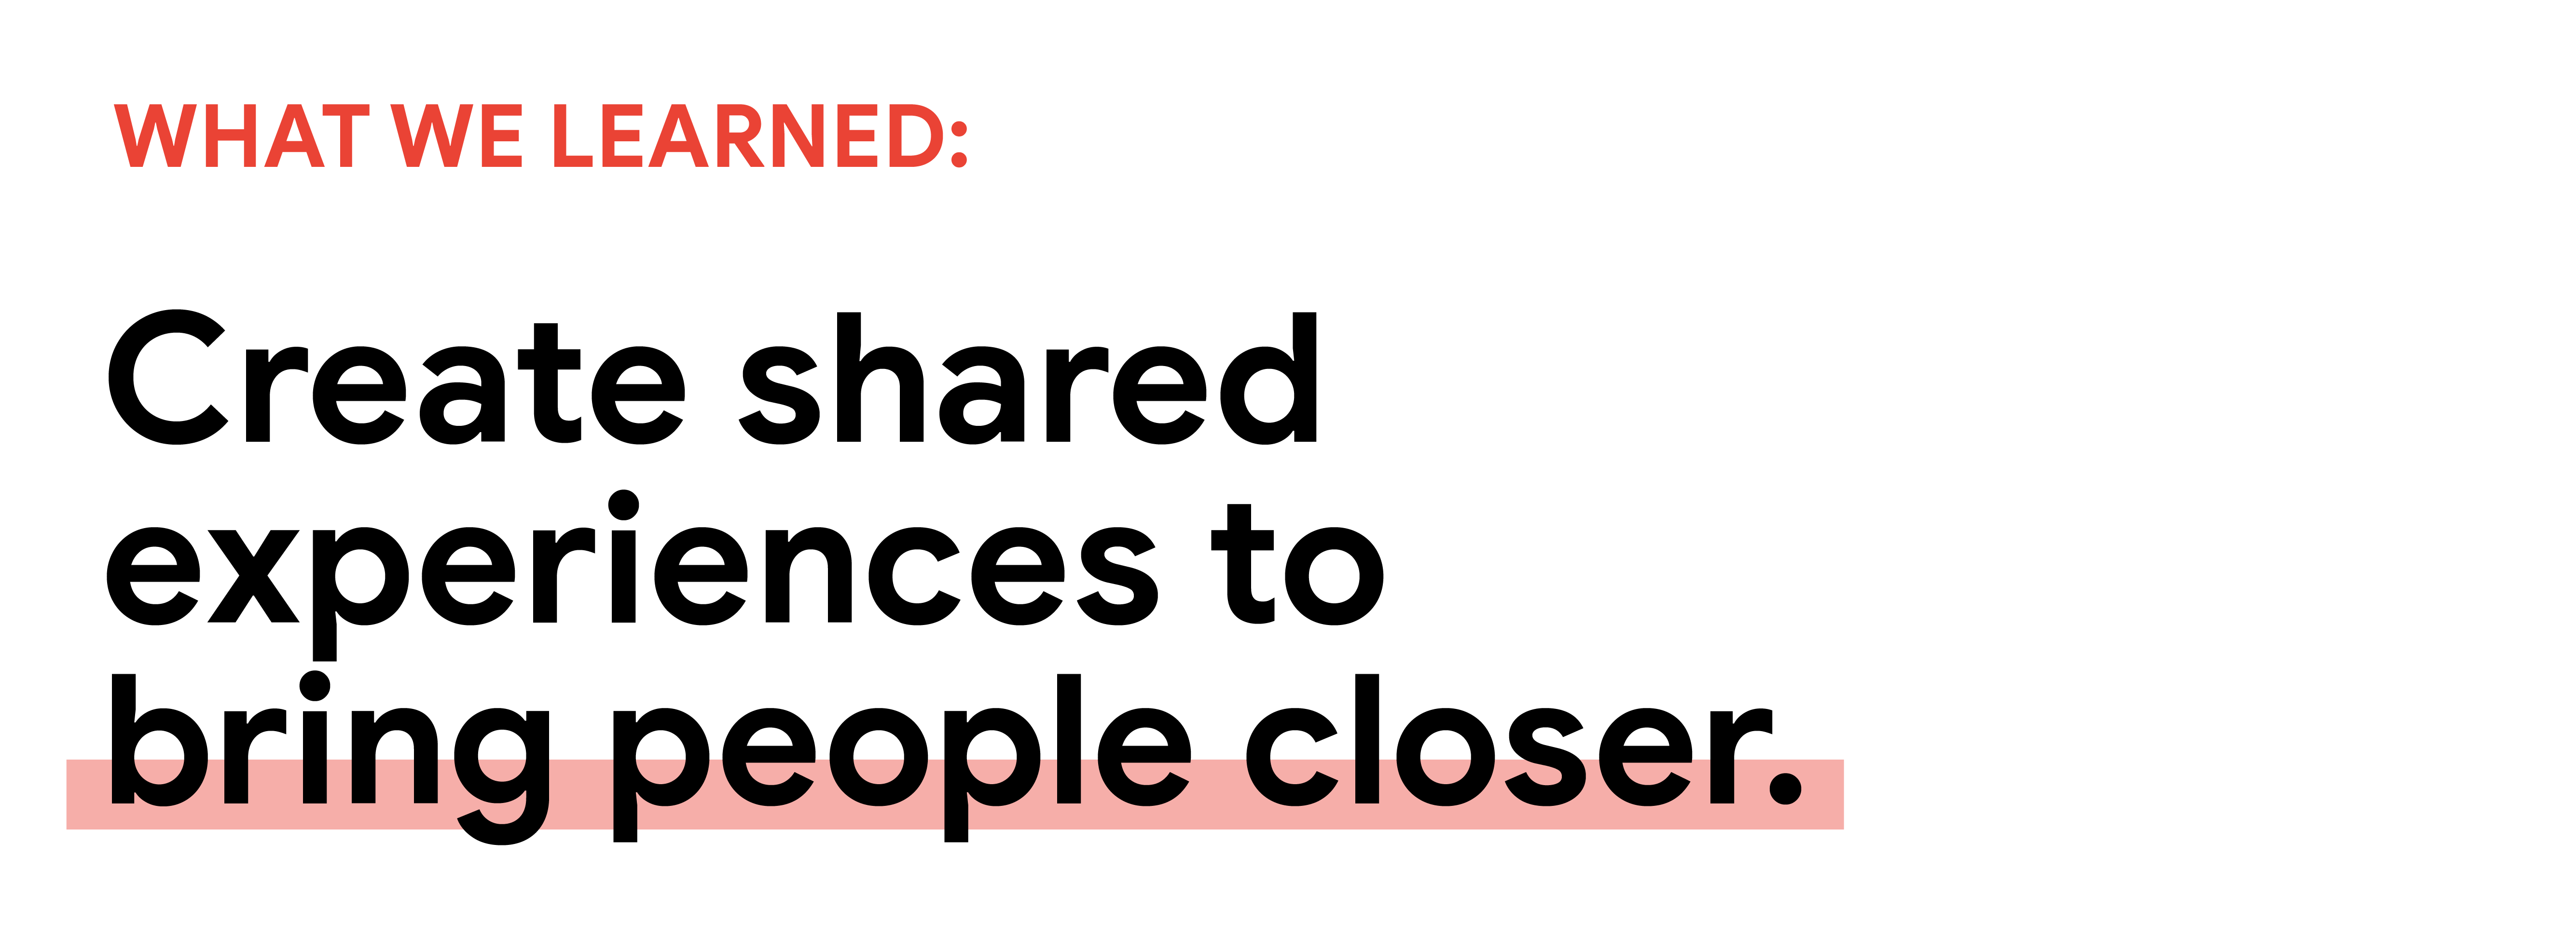 What we learned: Created shared experiences to bring people closer.